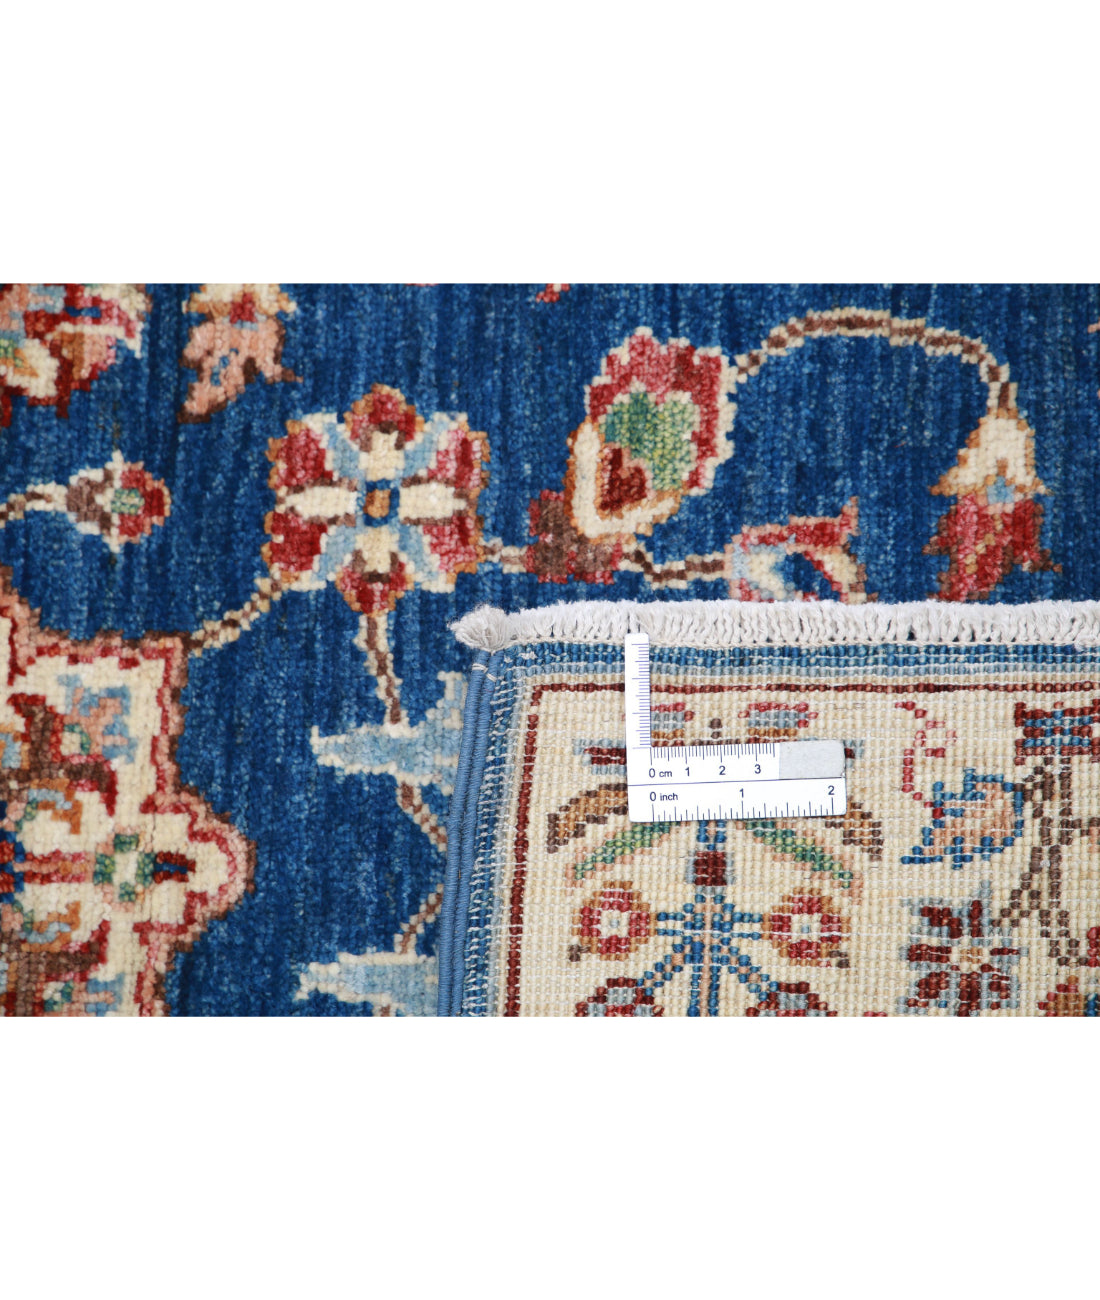 Ziegler 2'7'' X 3'11'' Hand-Knotted Wool Rug 2'7'' x 3'11'' (78 X 118) / Blue / Ivory